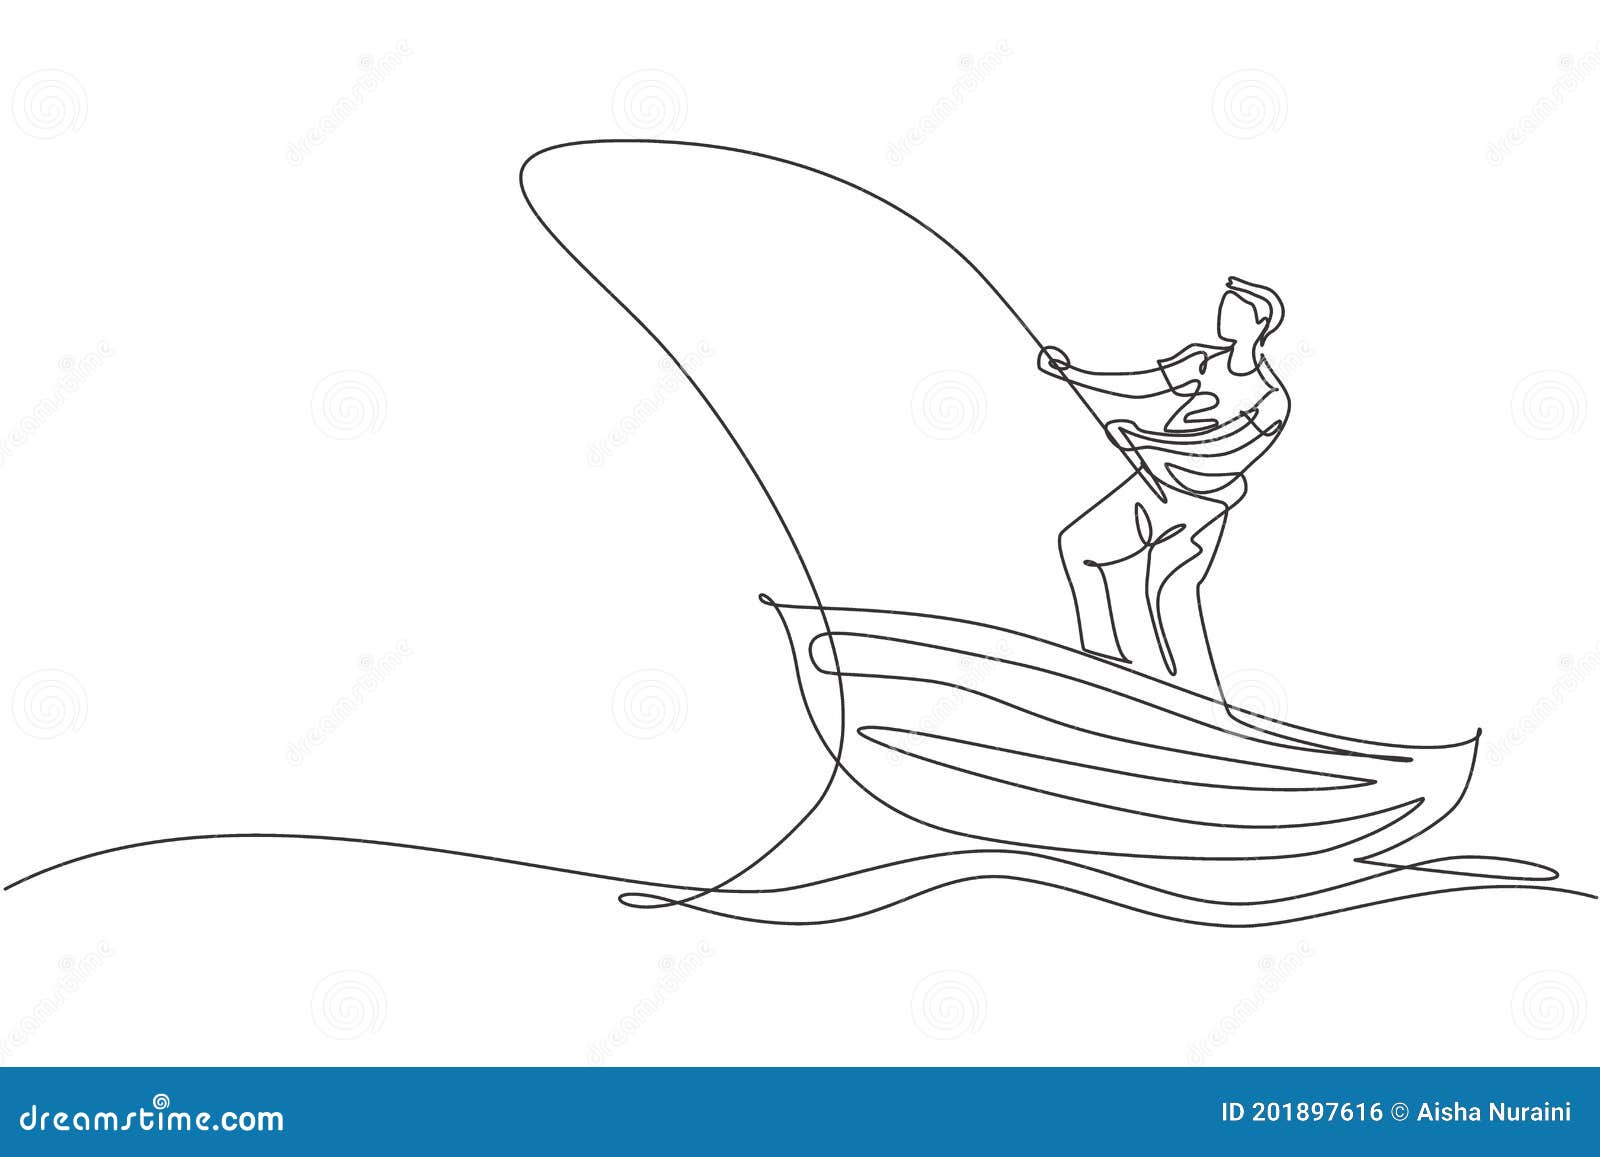 https://thumbs.dreamstime.com/z/one-continuous-line-drawing-young-fisherman-happy-standing-fishing-lake-wooden-boat-leisure-hobby-vacation-201897616.jpg